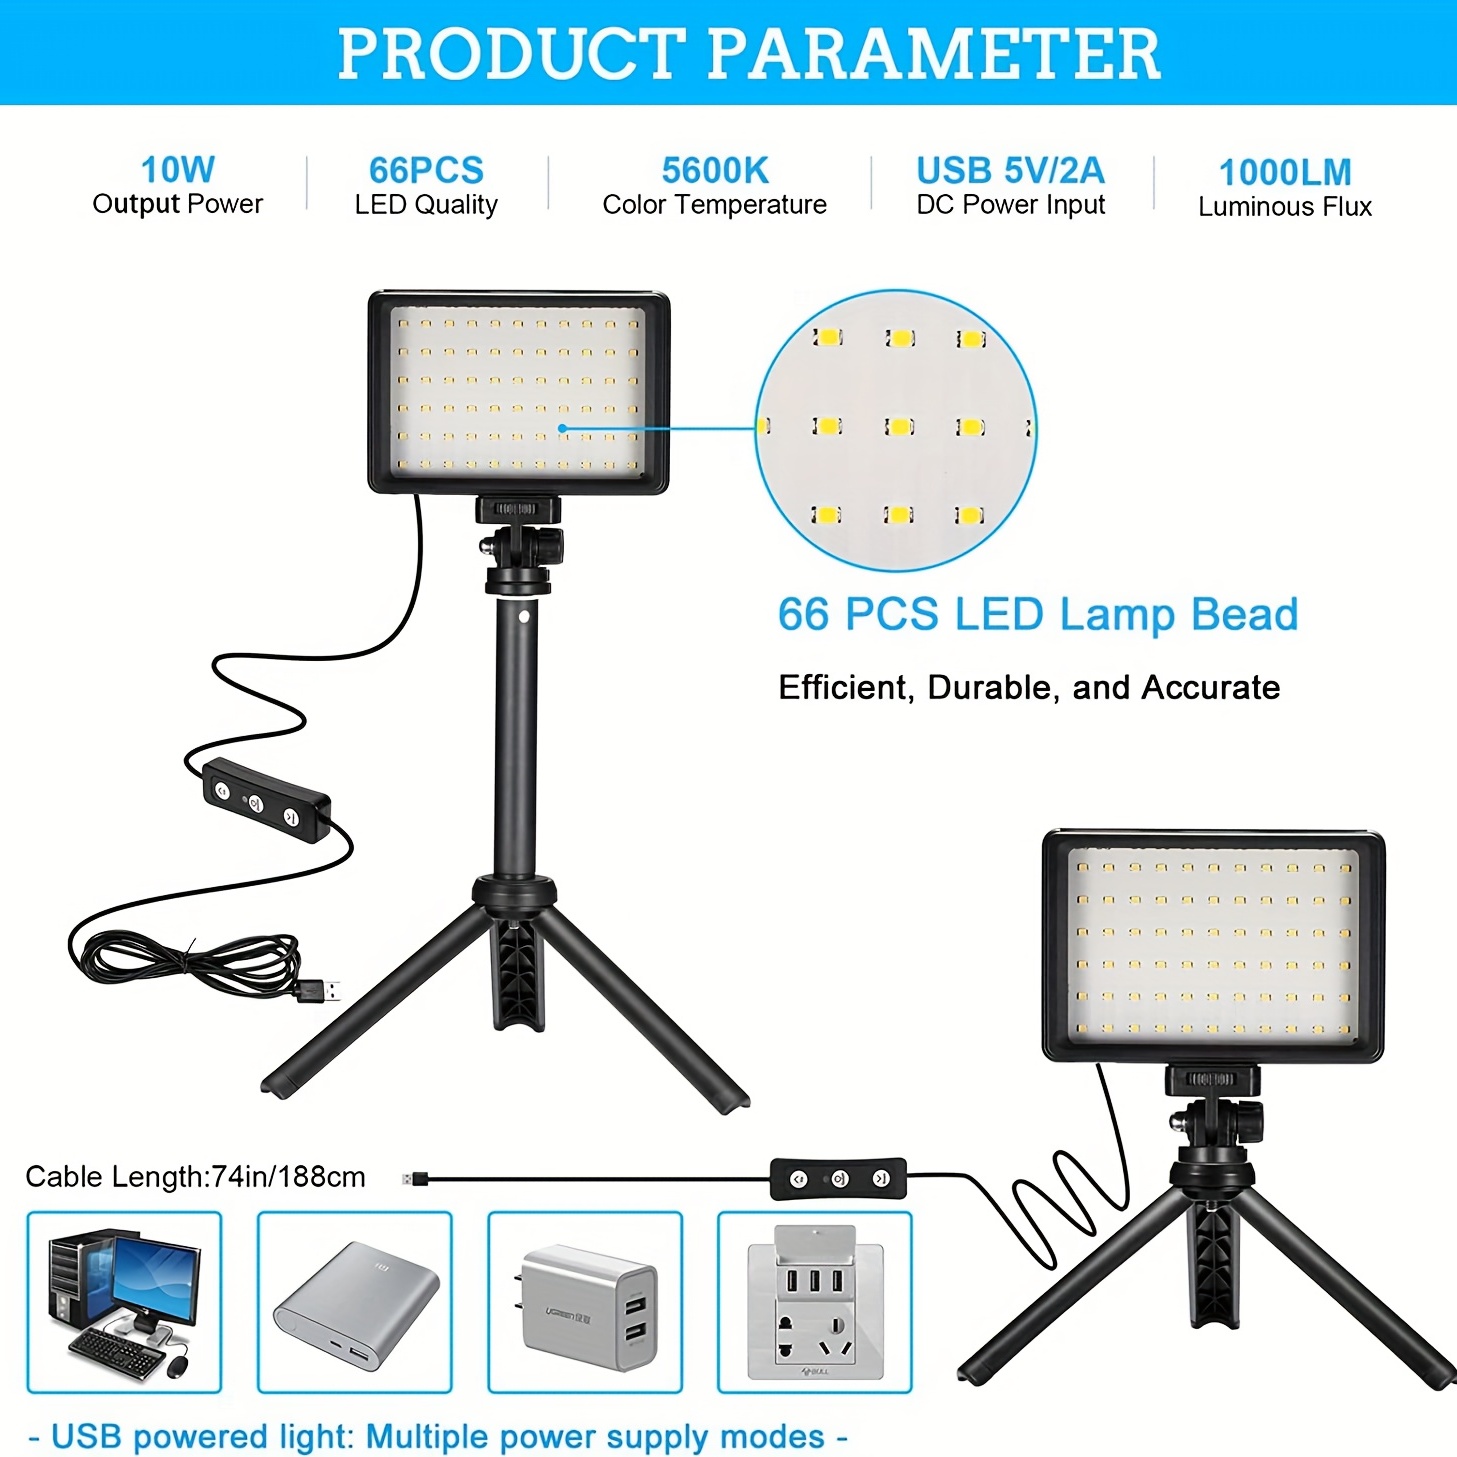 NEEWER 2 Pack Tabletop Dimmable 5600K USB LED Video Lighting with Color  Filters and Tripod Stand